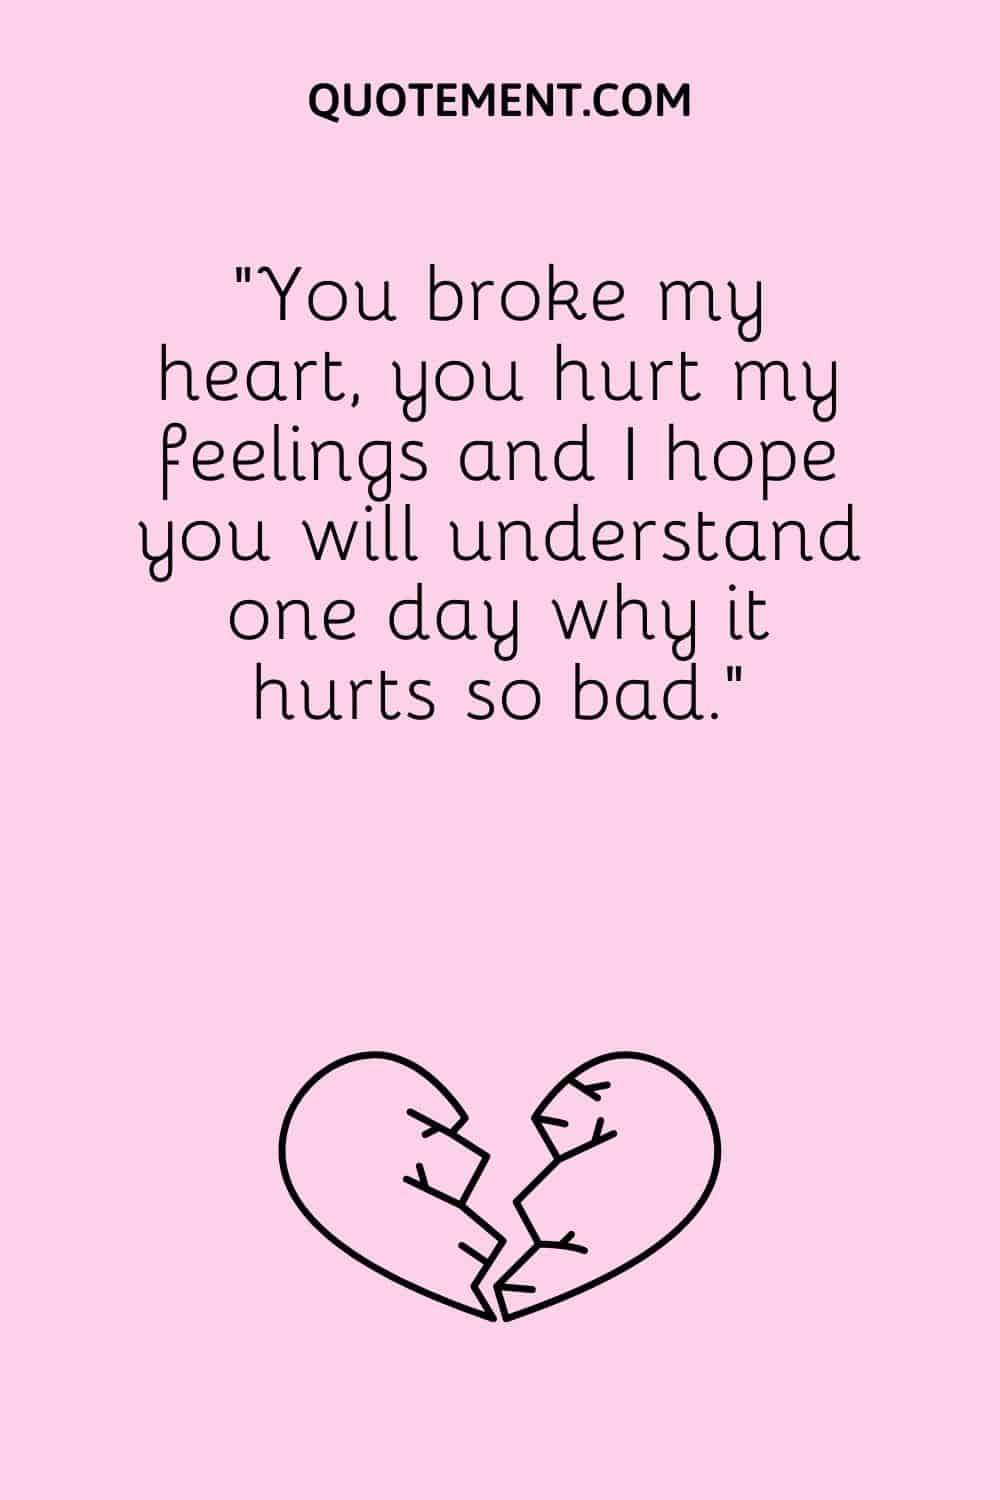 “You broke my heart, you hurt my feelings and I hope you will understand one day why it hurts so bad.”